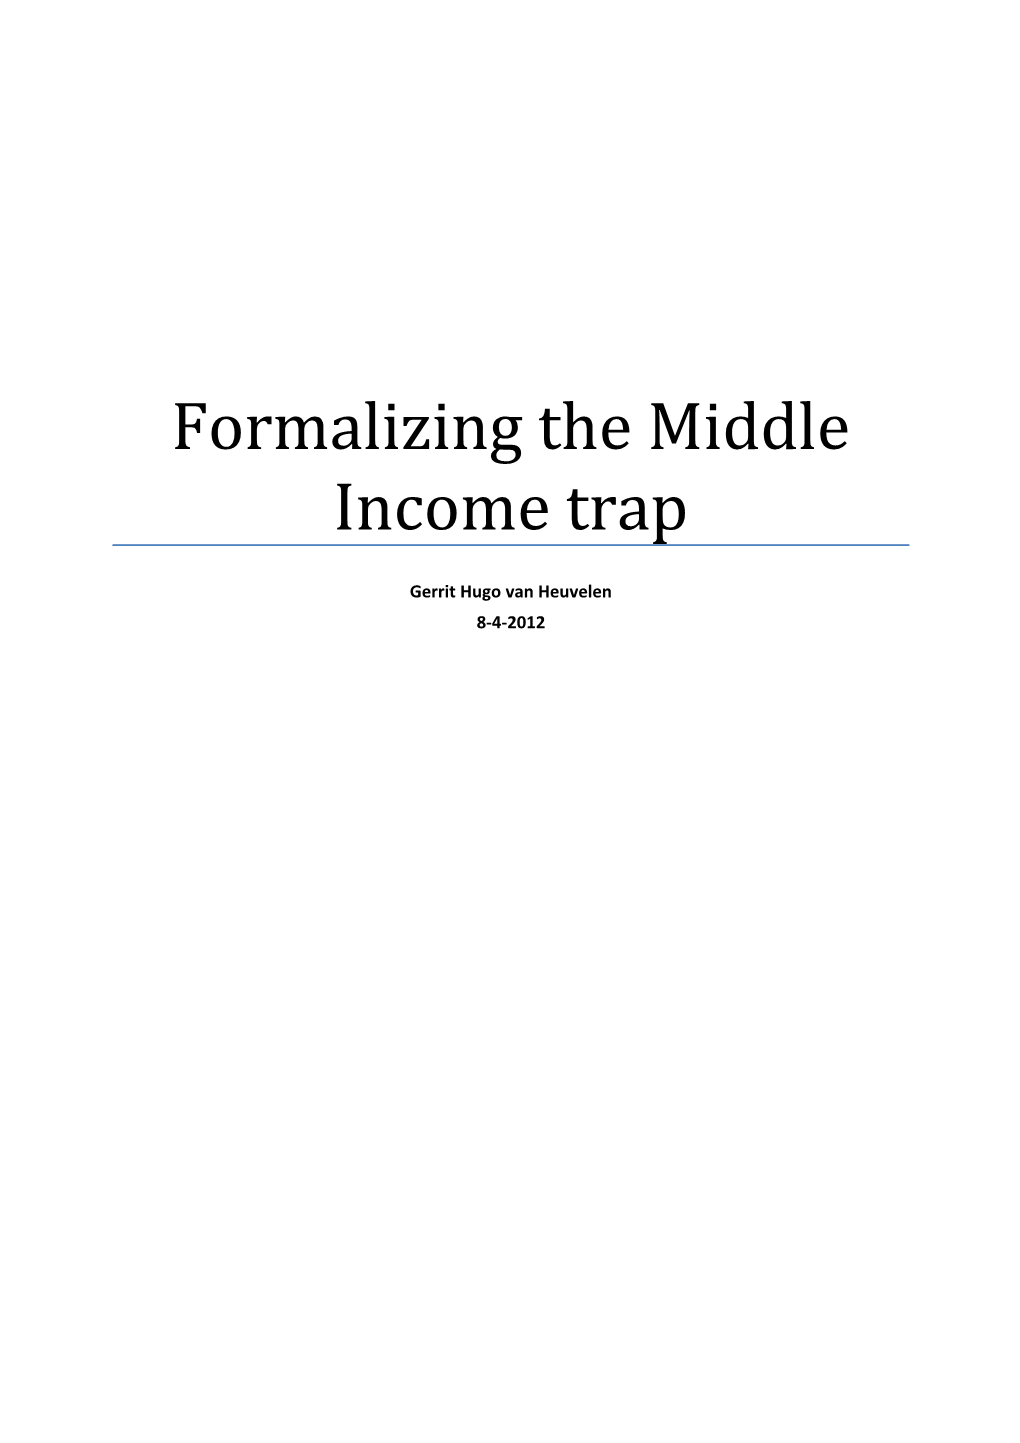 Formalizing the Middle Income Trap